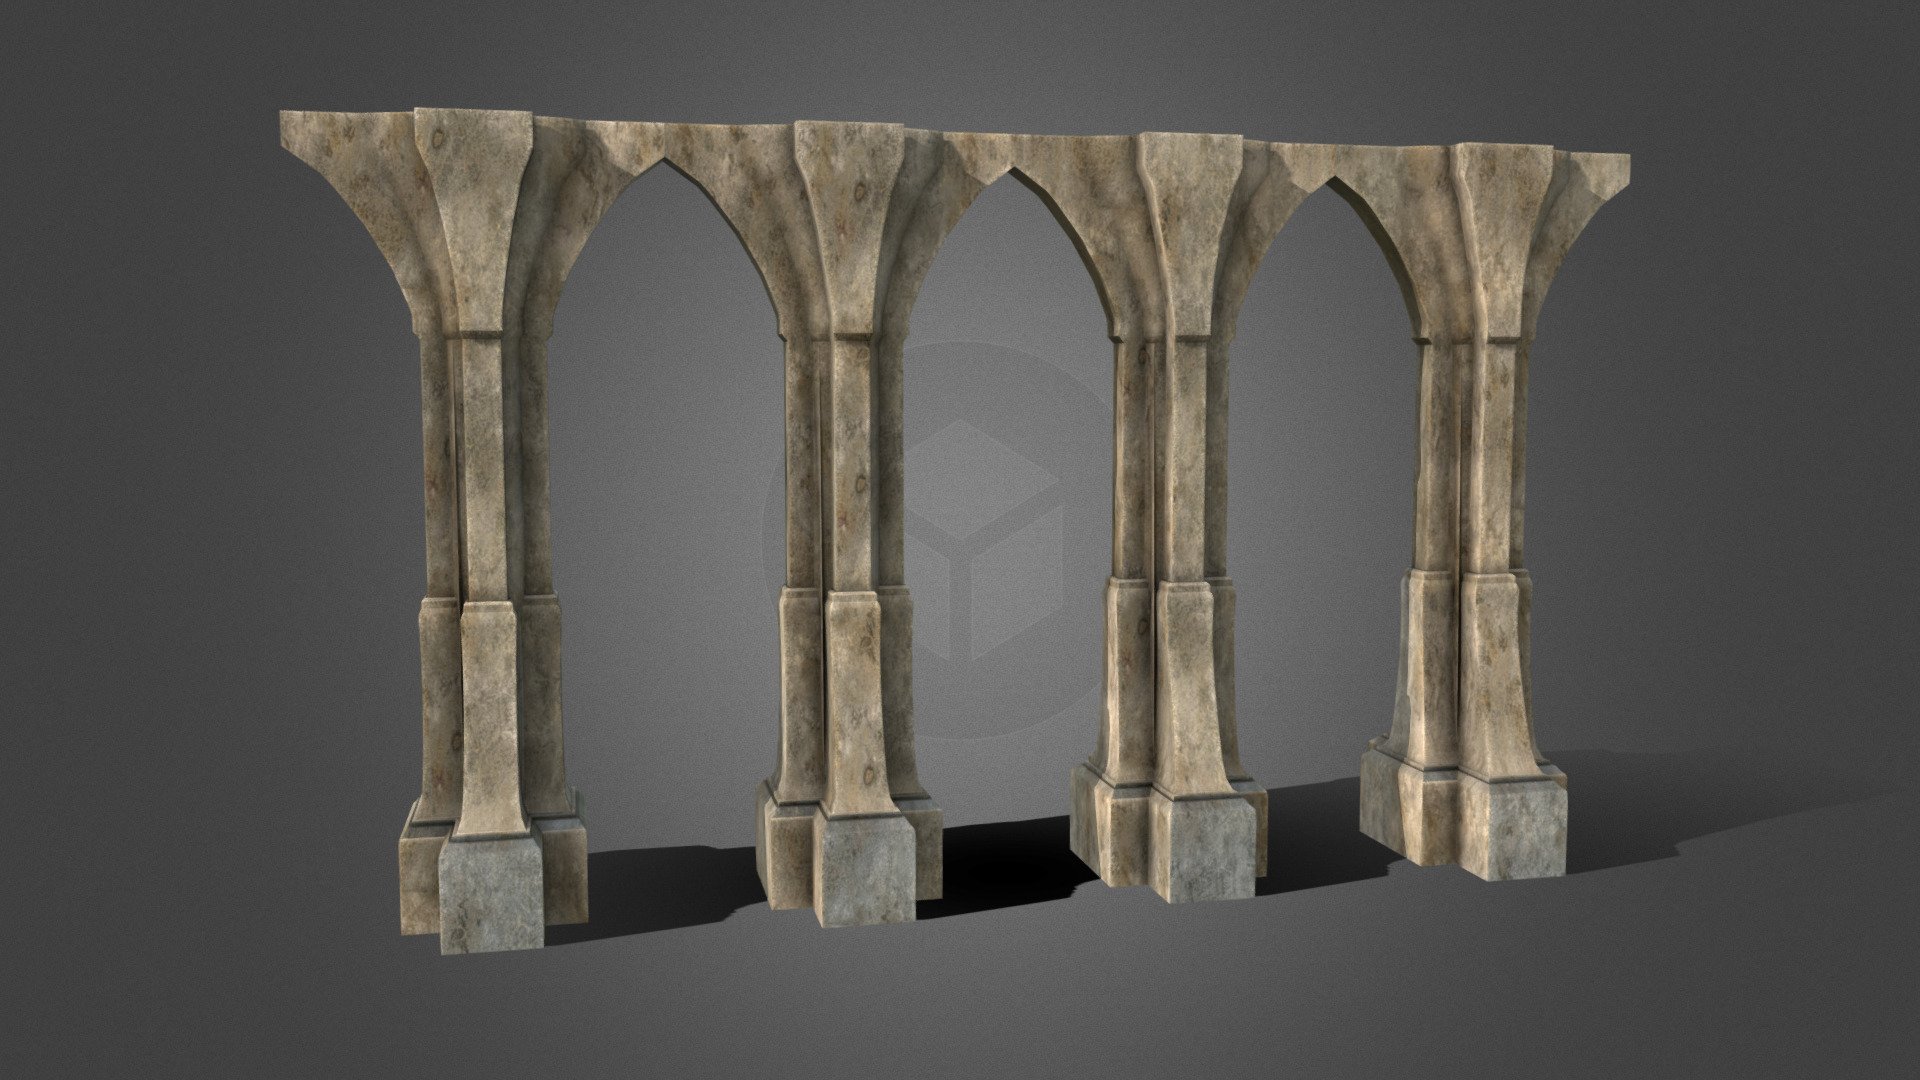 Architectural structure of neogothik piers. 

Textures 2K for each mesh. (Color, Roughness, Normal/Bump) - neogothical pier architectural asset pack - Download Free 3D model by Samuel Francis Johnson (Oneironauticus) (@oneironauticus) 3d model